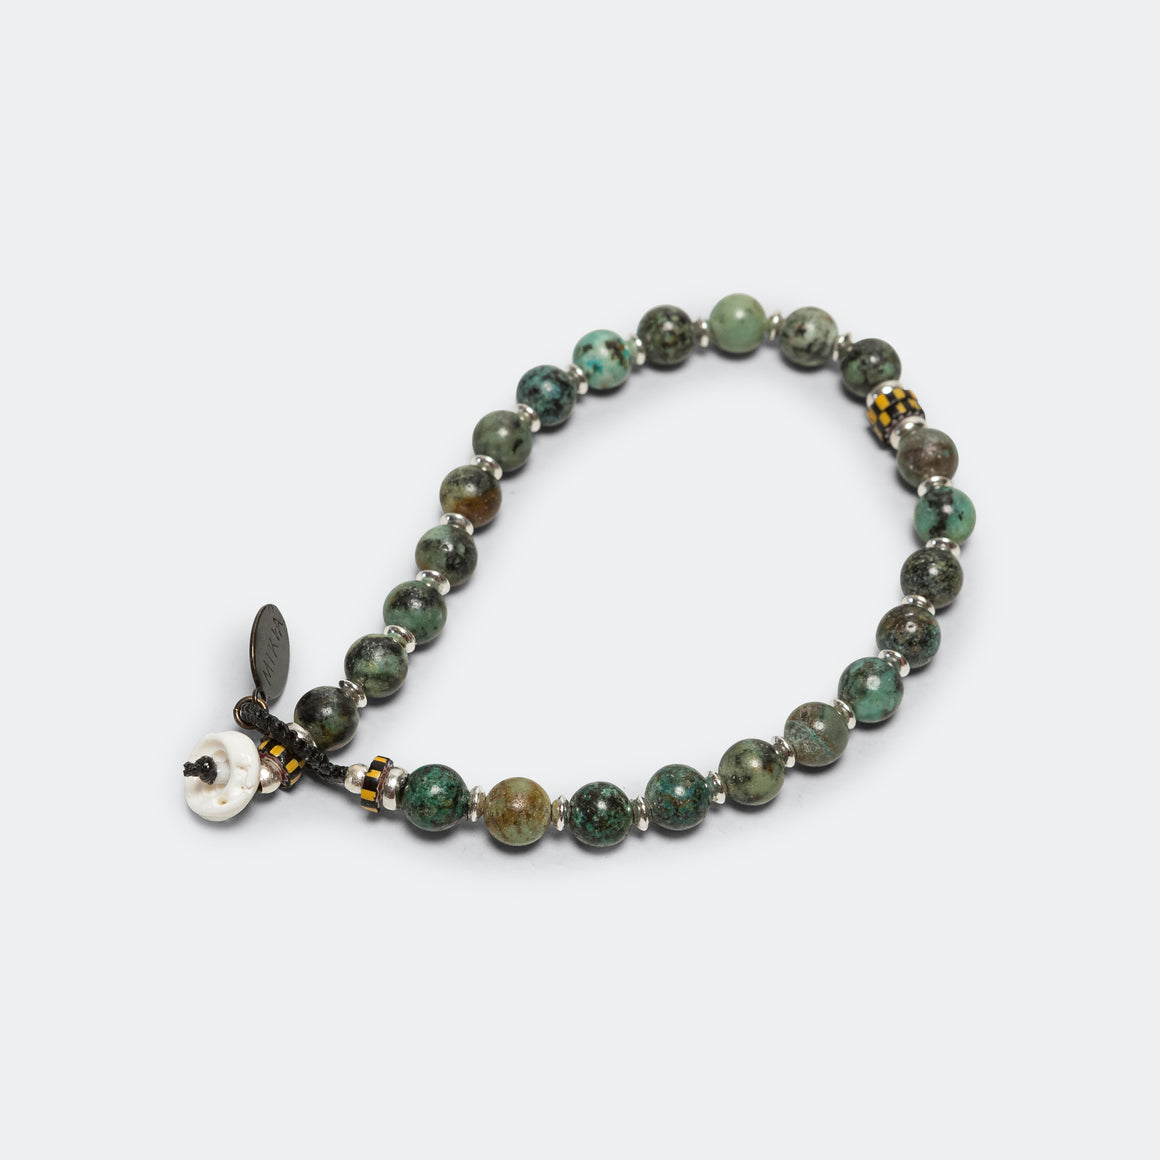 Mikia - 6mm Stone Bracelet - African Turqoise - UP THERE